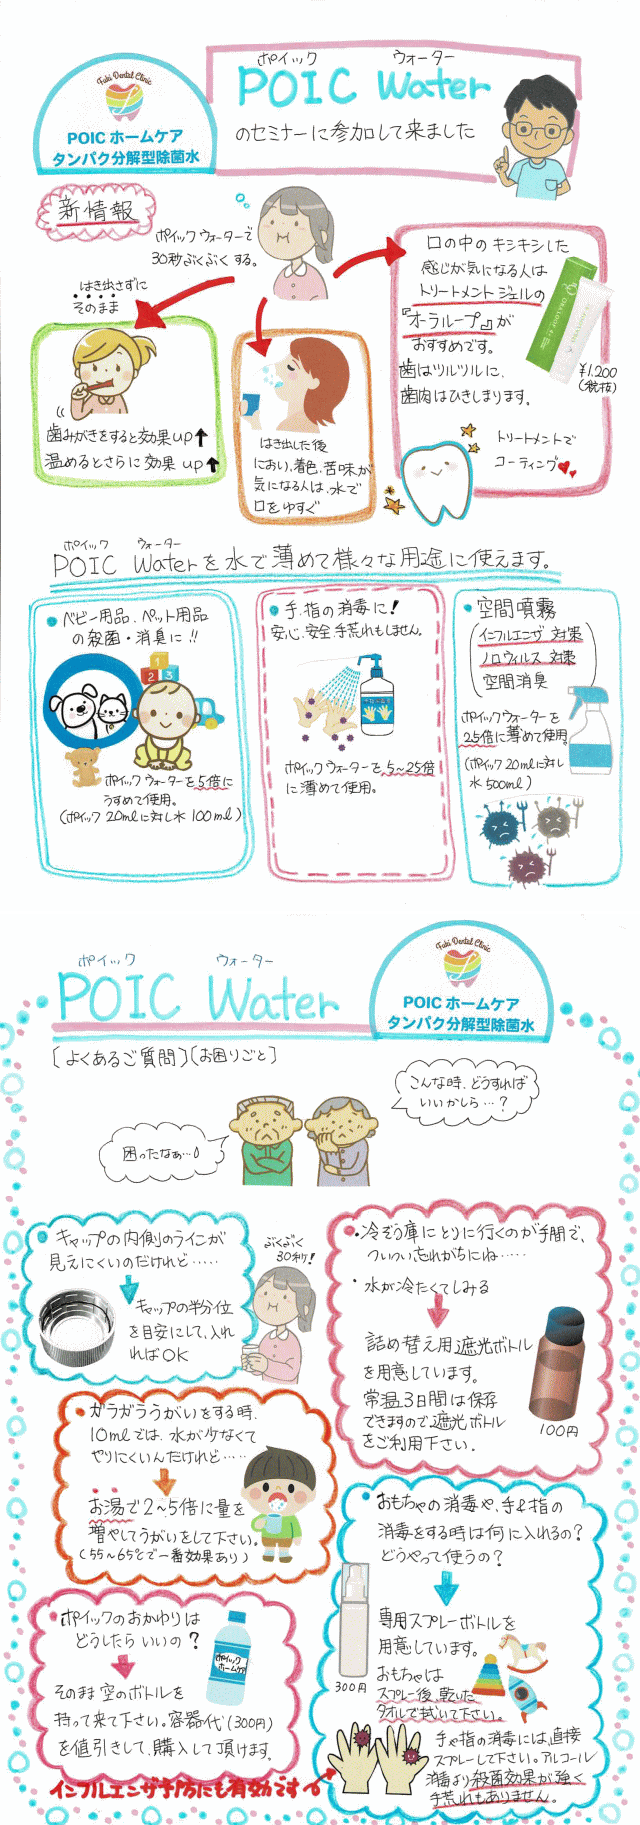 POIC　WATER